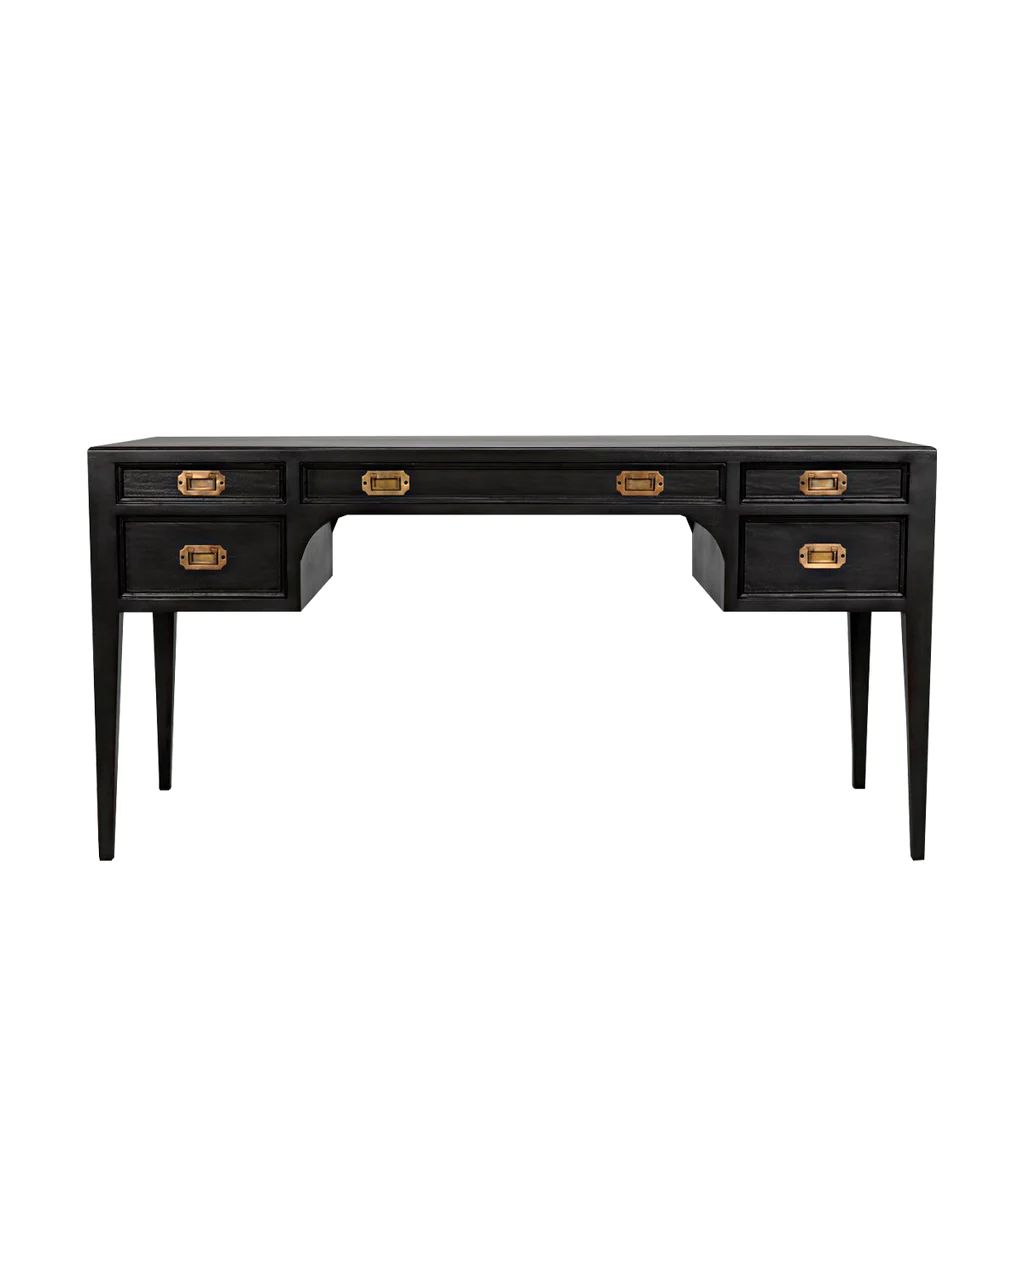 Gallup Writing Desk | McGee & Co.